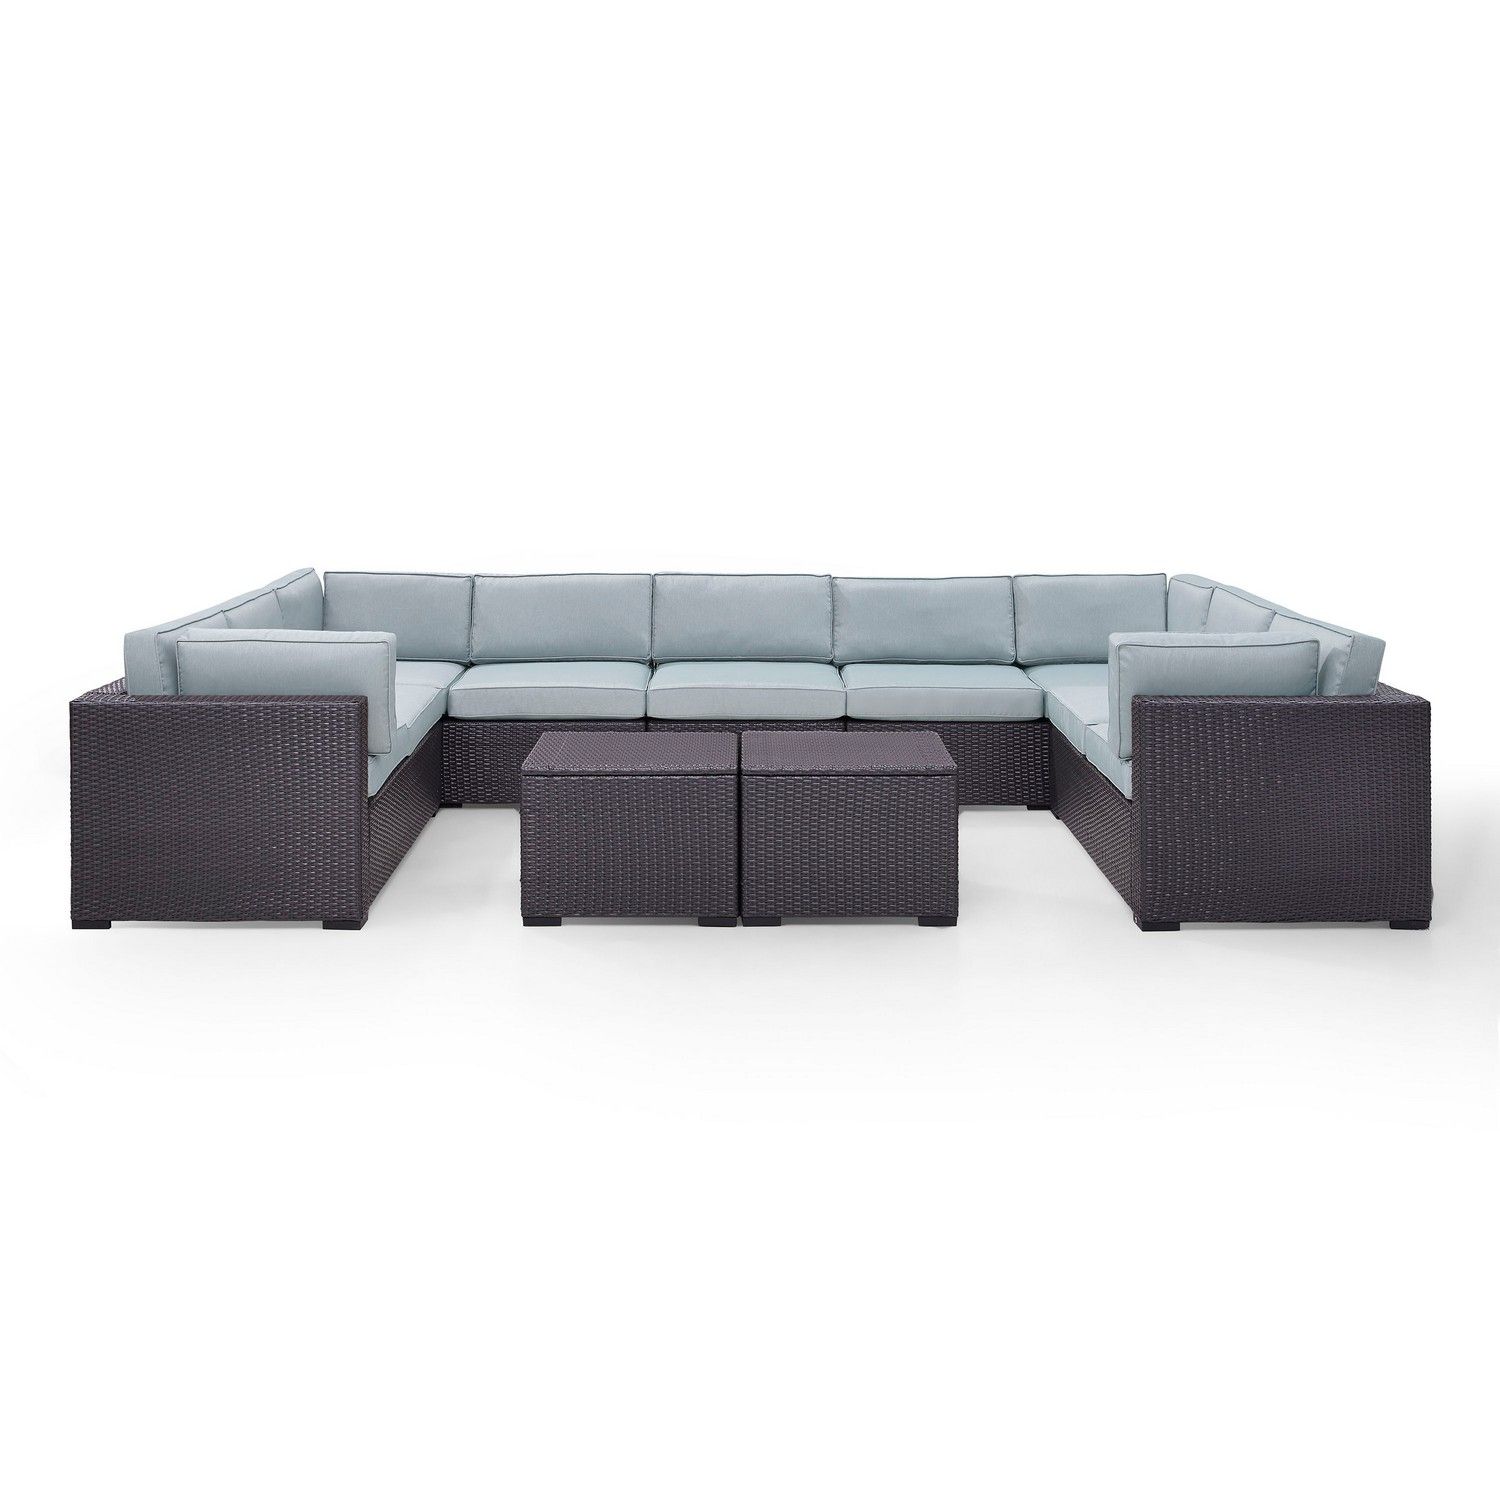 Crosley Biscayne 7-PC Outdoor Wicker Sectional Set - 4 Loveseats, Armless Chair, 2 Coffee Tables - Mist/Brown